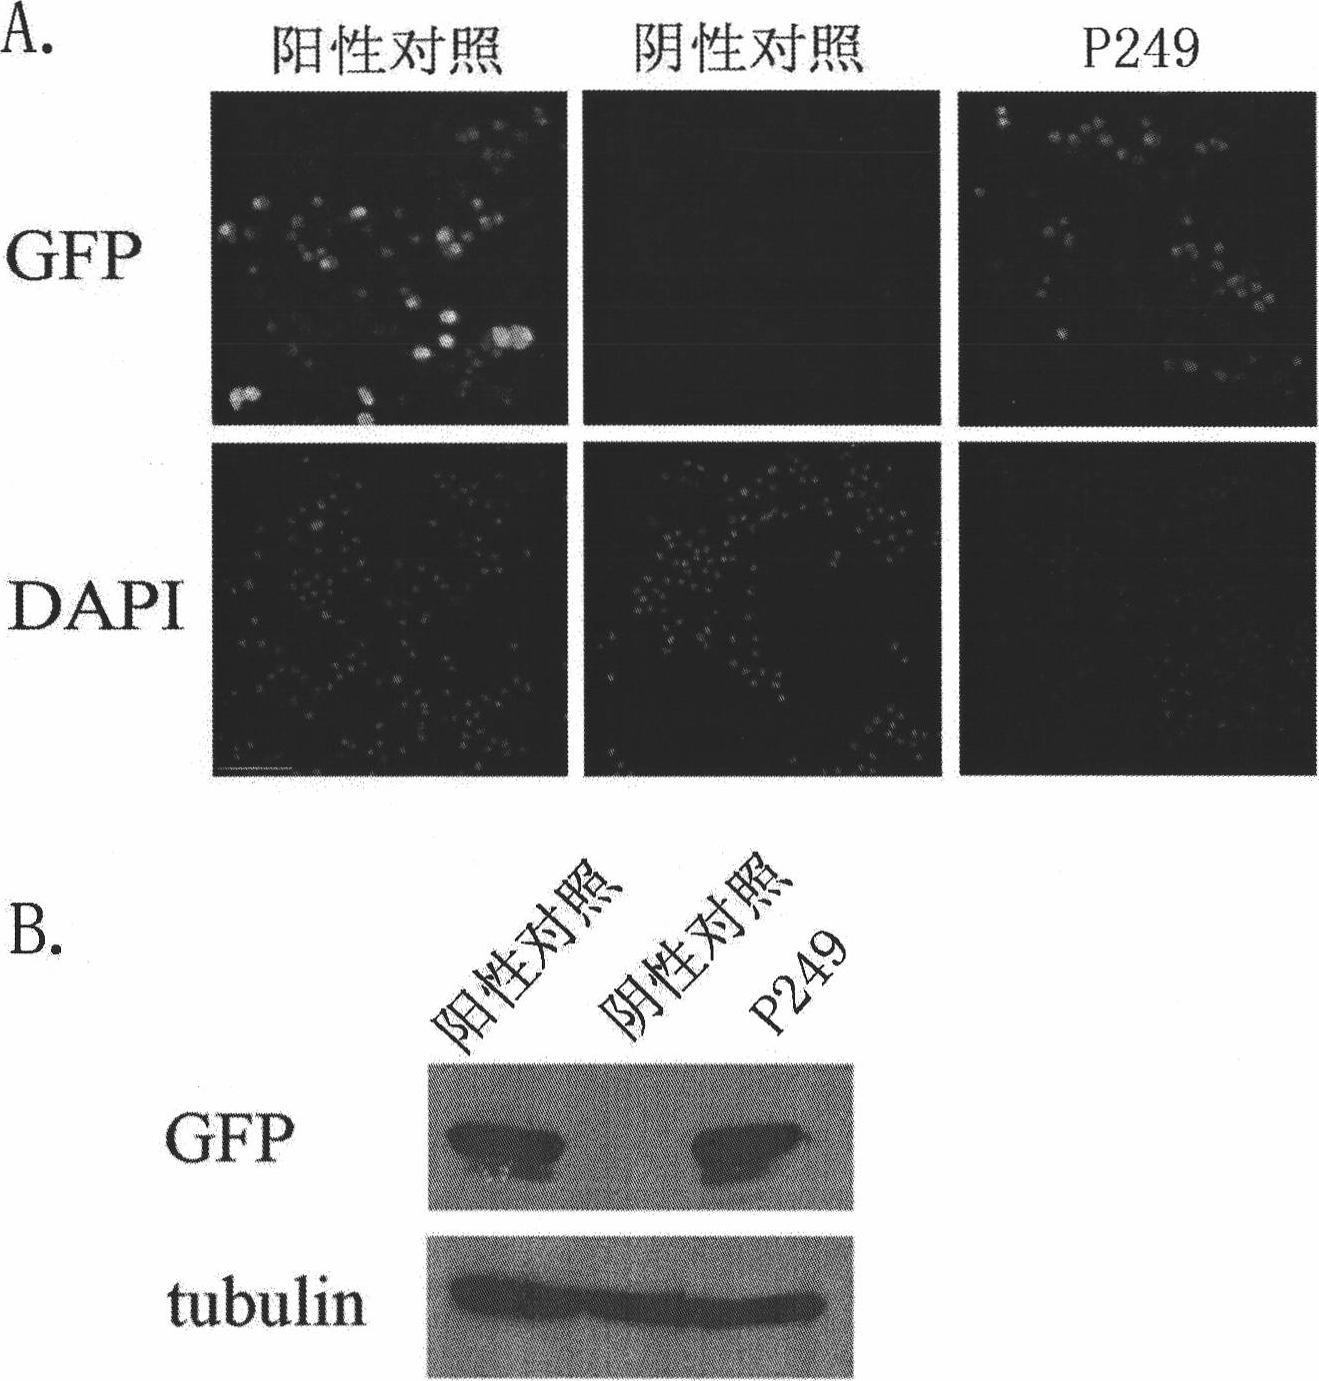 Universal strong promoter among species derived from white spot syndrome virus and application thereof